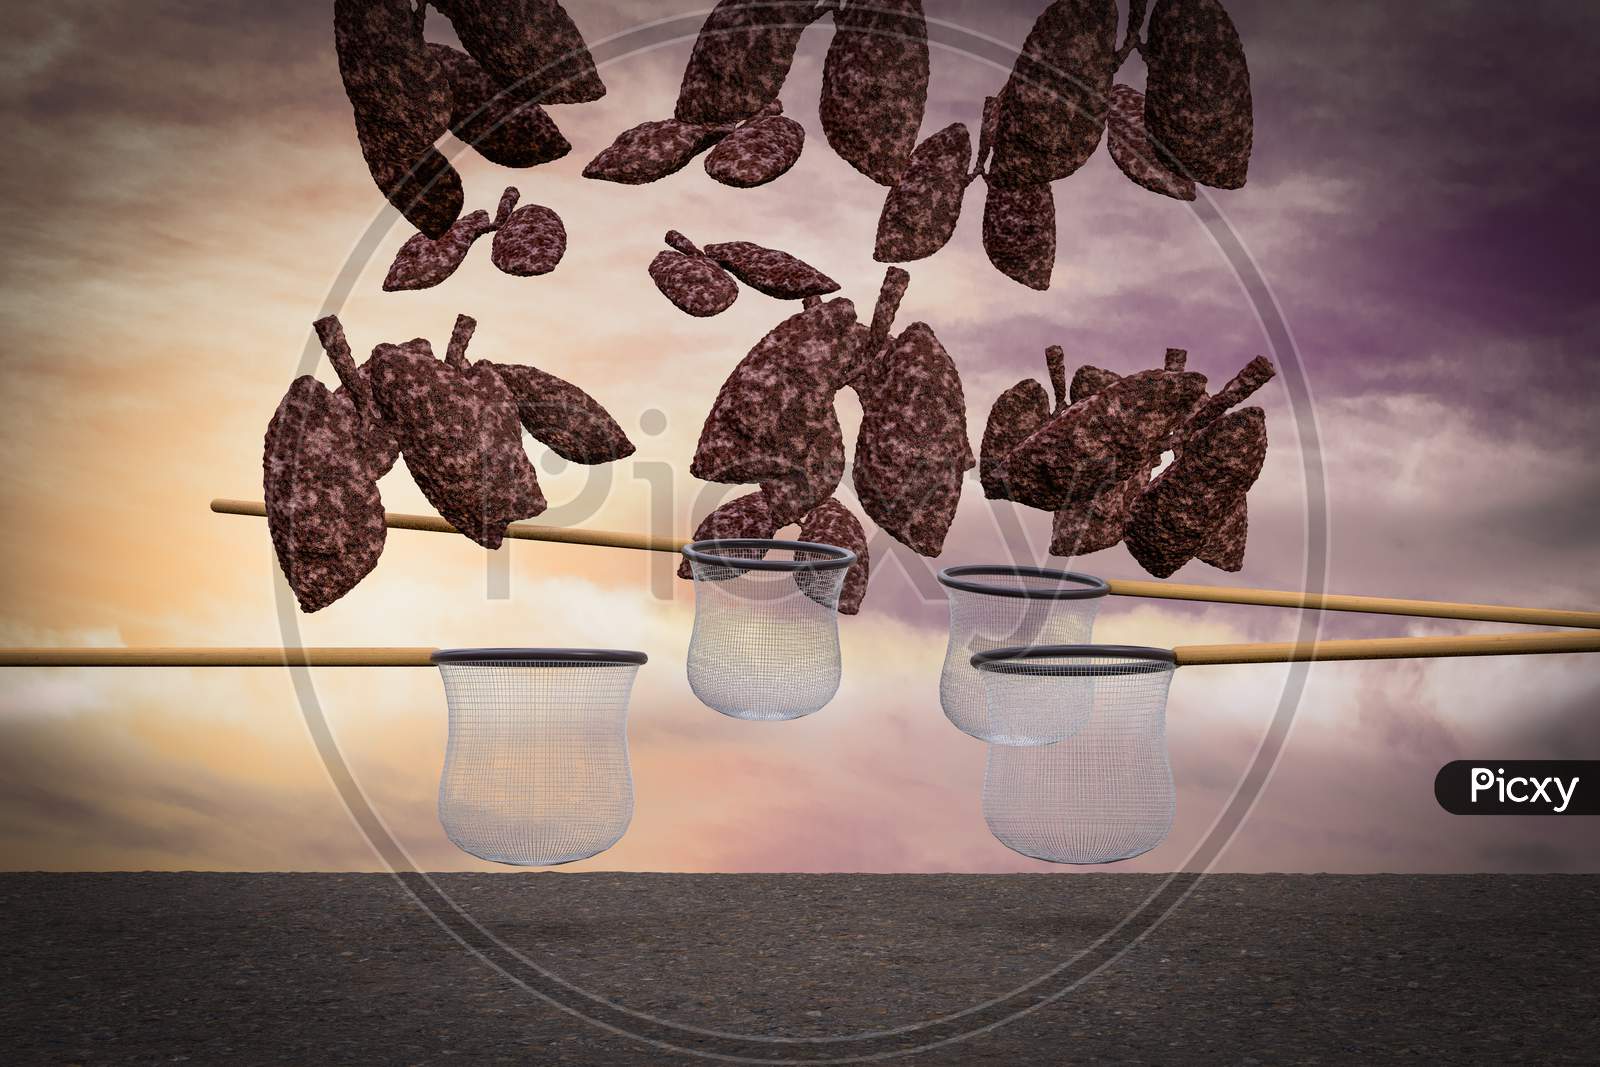 Disease Lungs Falling From Sky And The Nets Try To Catch Them At Sunset Magenta Day Demonstrating No Smoking Or Save Your Lungs Concept. 3D Illustration